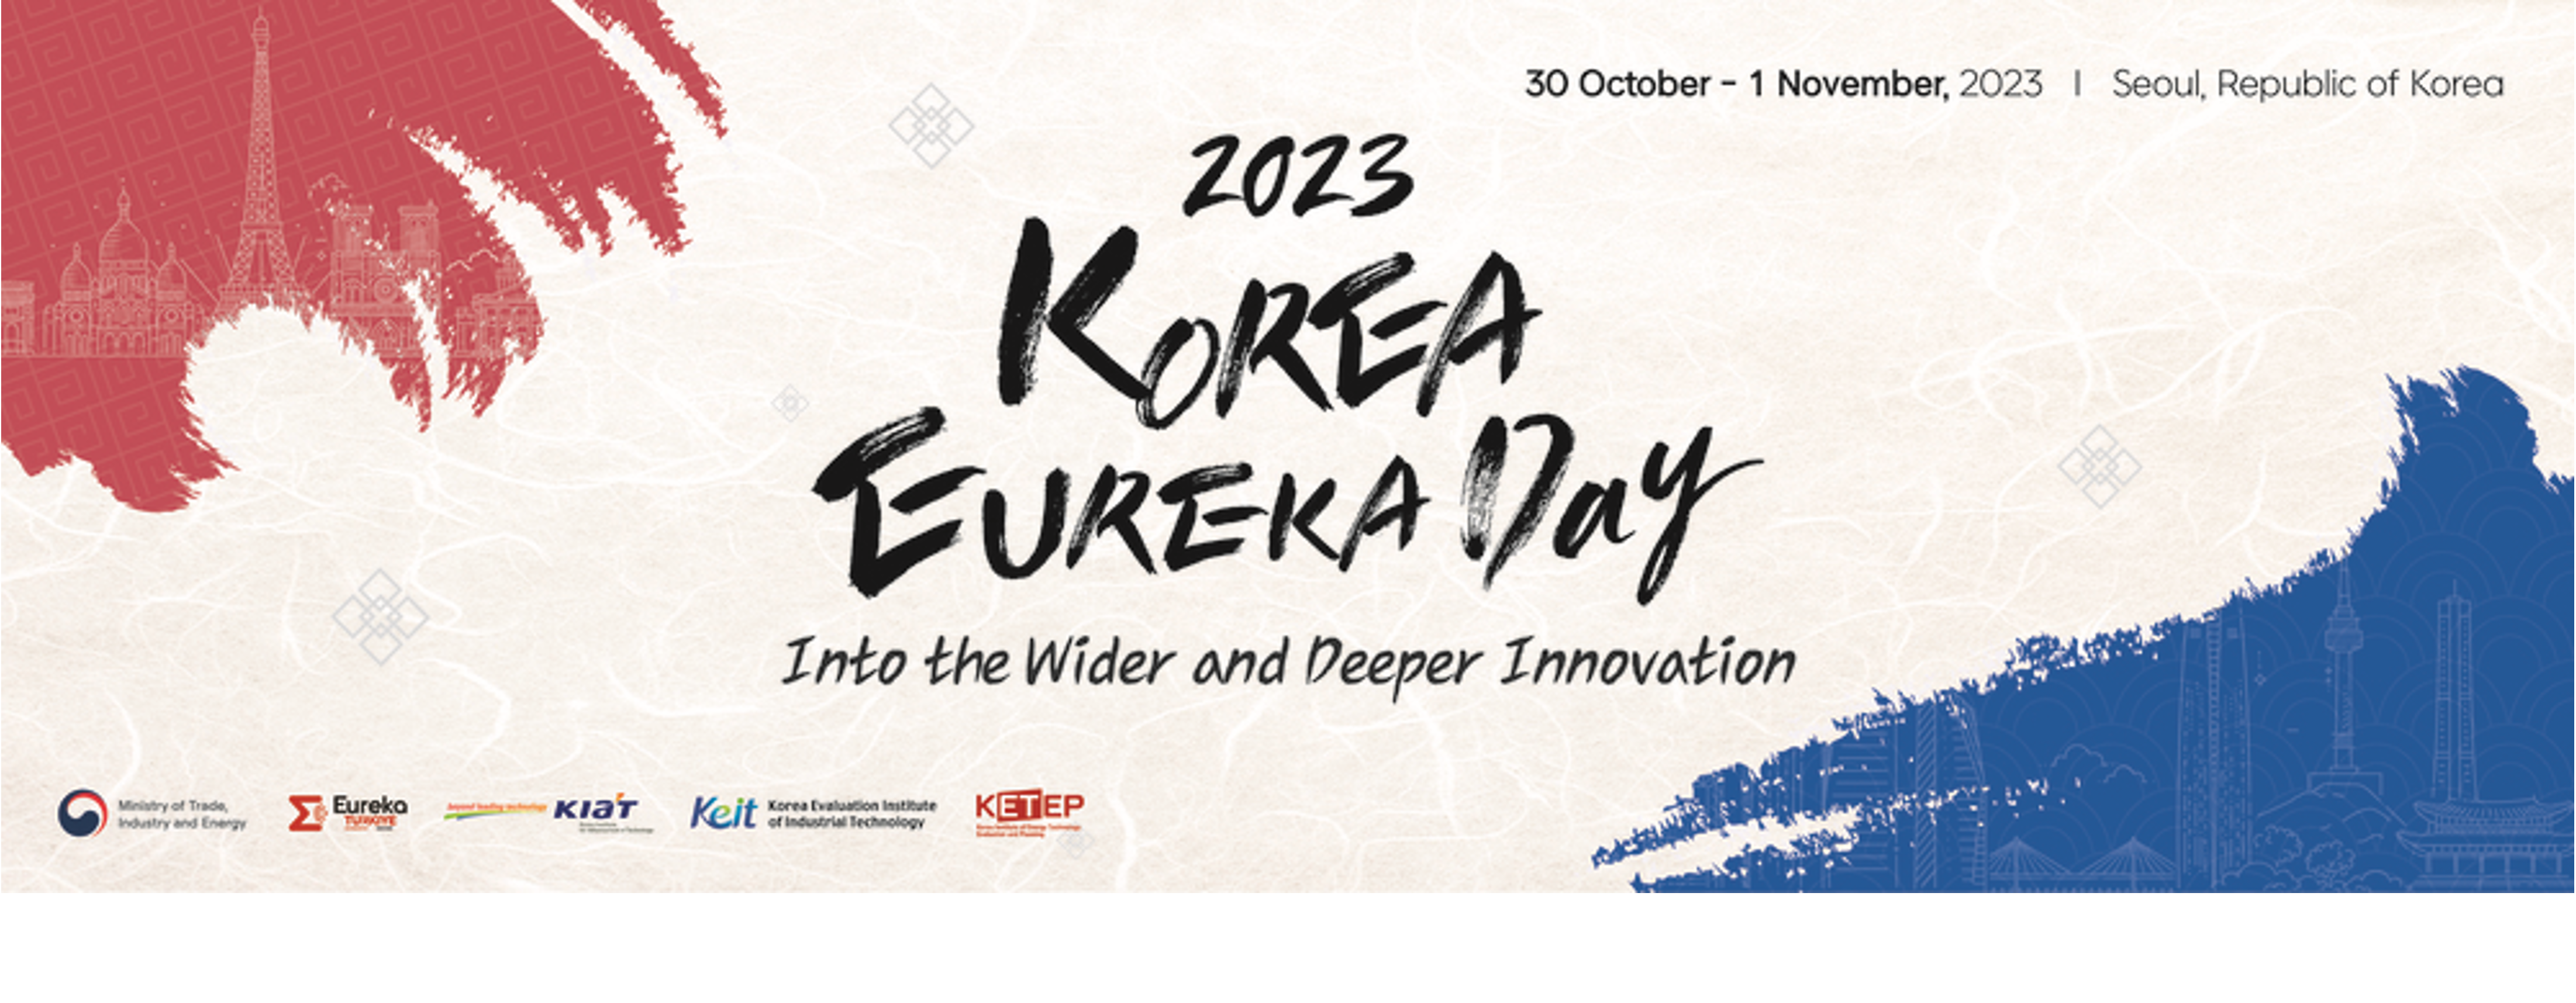 Ministry of Trade, Industry & Energy - Republic of Korea